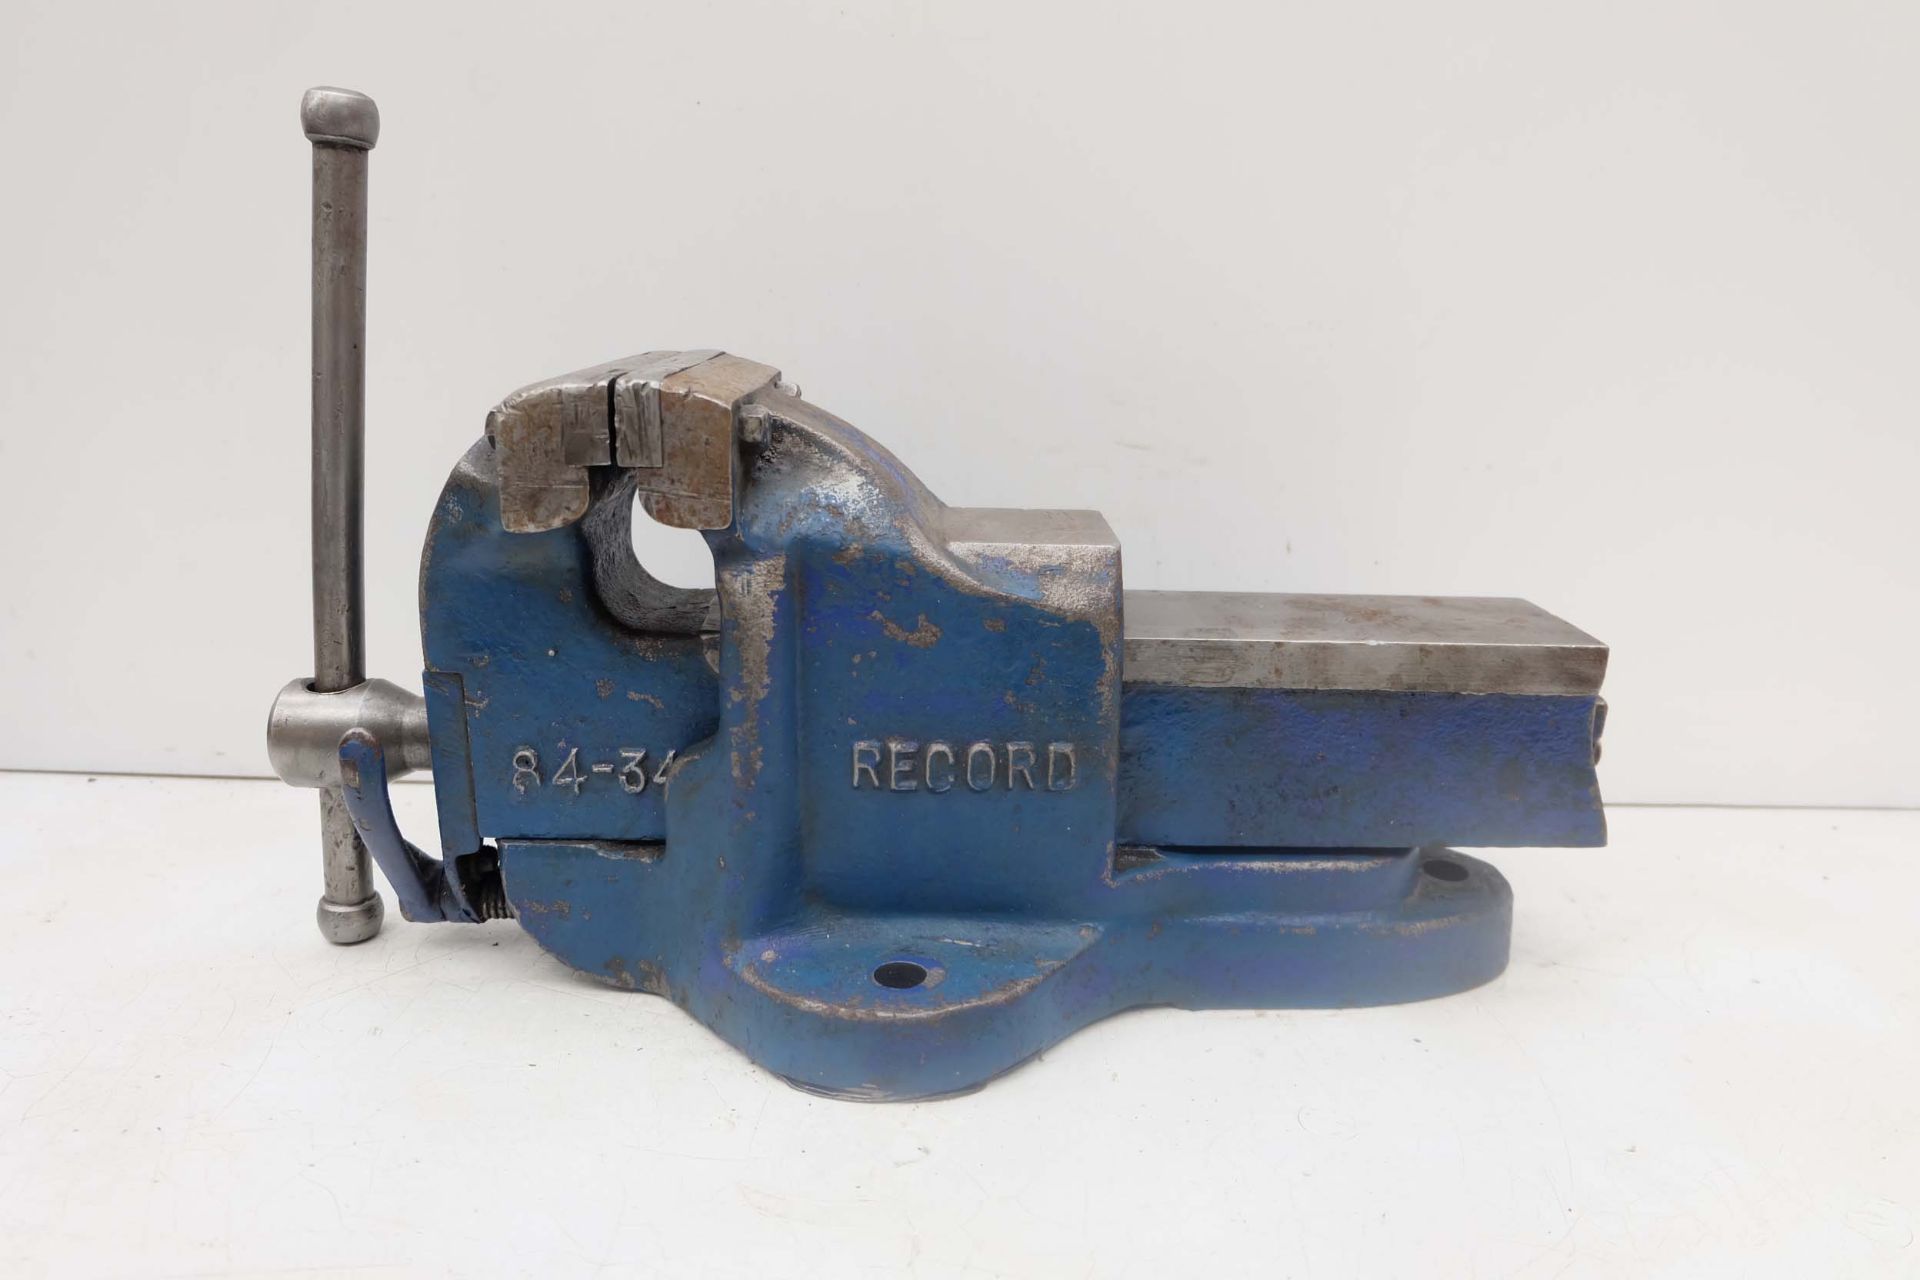 Record 84 - 34 Engineers Bench Vice. Width of Jaws 4 1/2". Maximum Opening 6". With Quick Release.